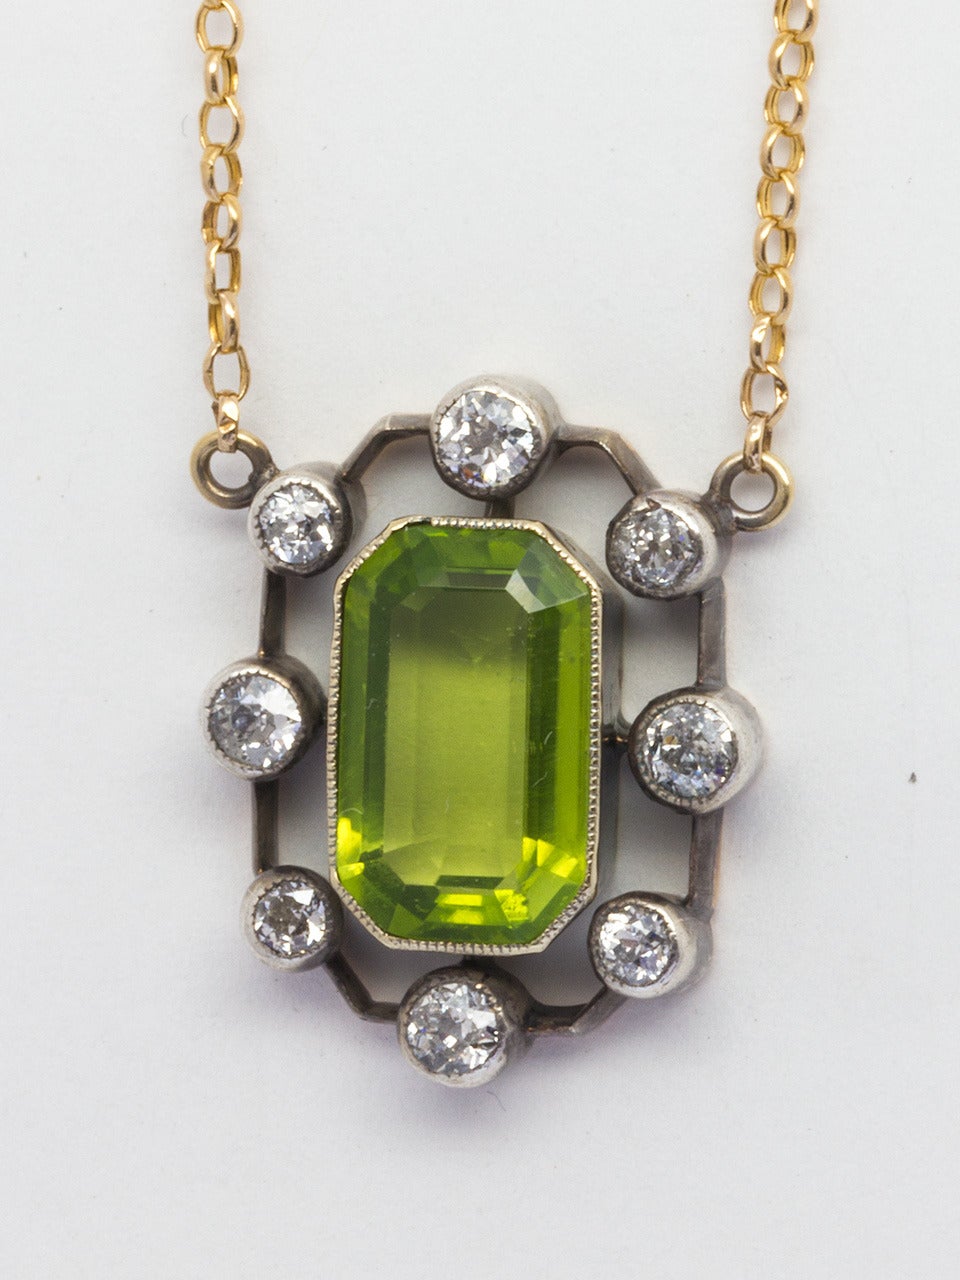 Hand made silver over gold setting with 8 bezel set Old European Cut diamonds approximately 0.80 carat total surrounding a beautiful green peridot, measuring 8mm x 13mm emerald cut. On 16